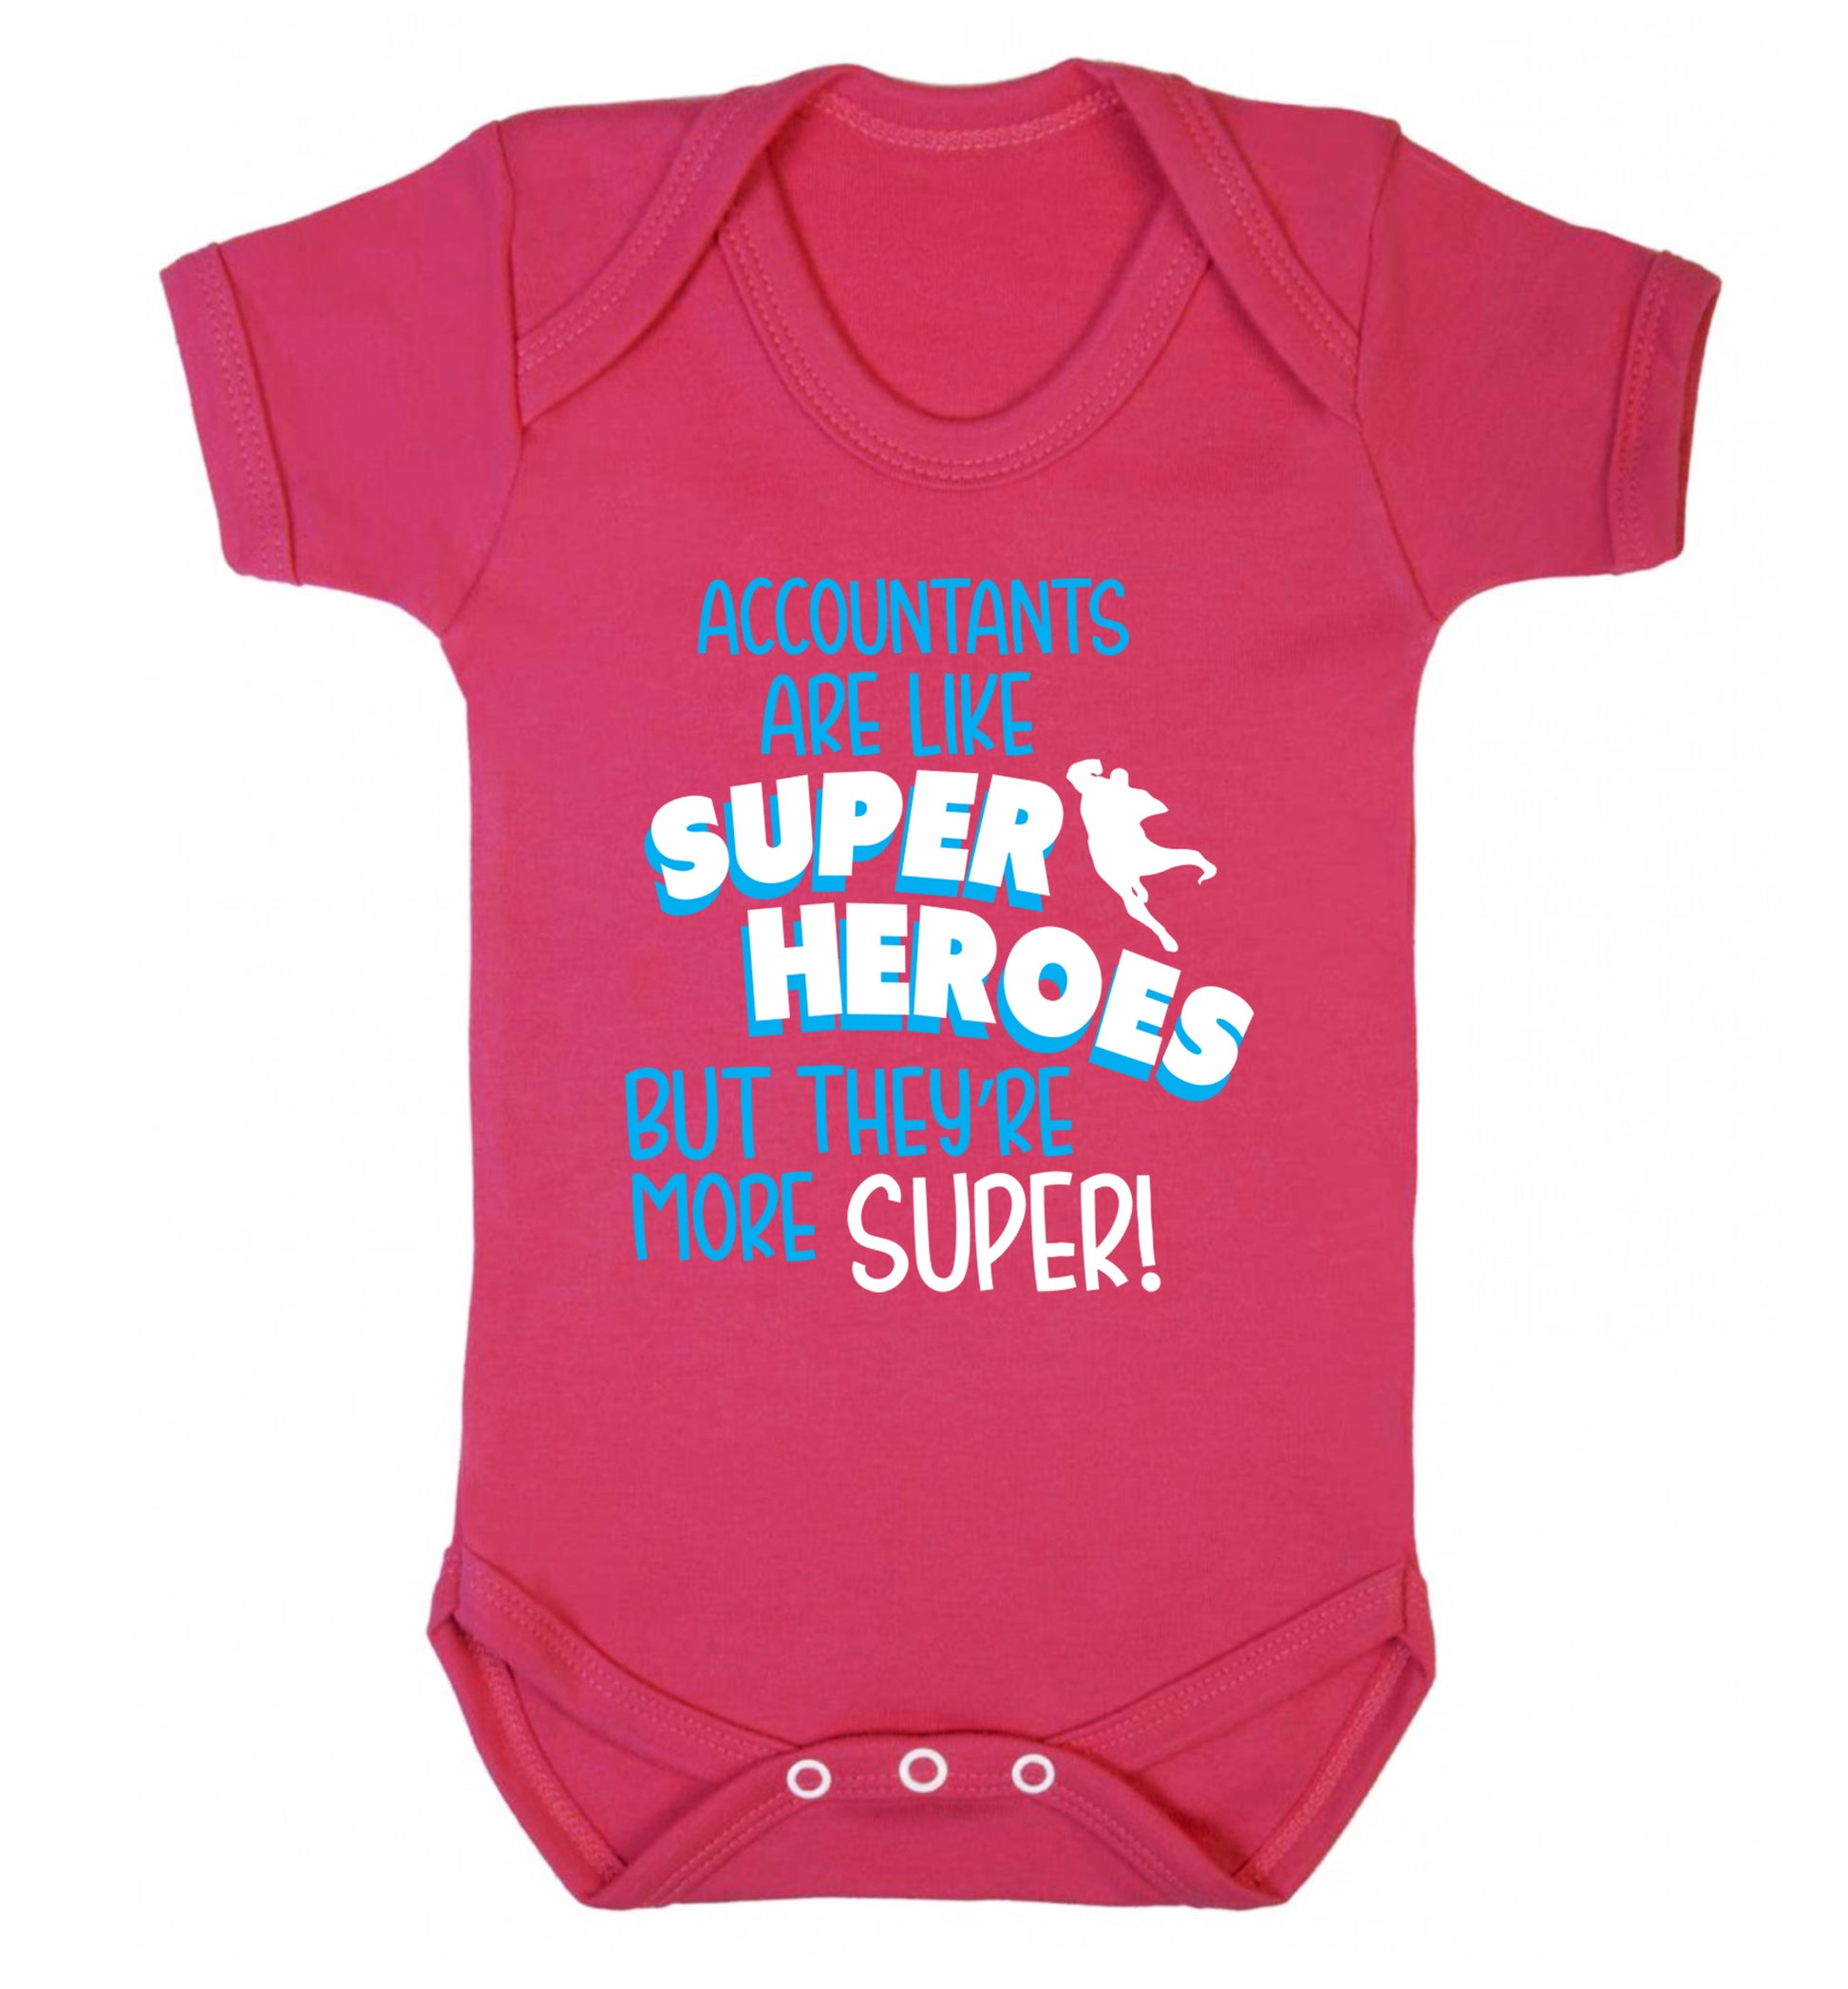 Accountants are like superheroes but they're more super Baby Vest dark pink 18-24 months